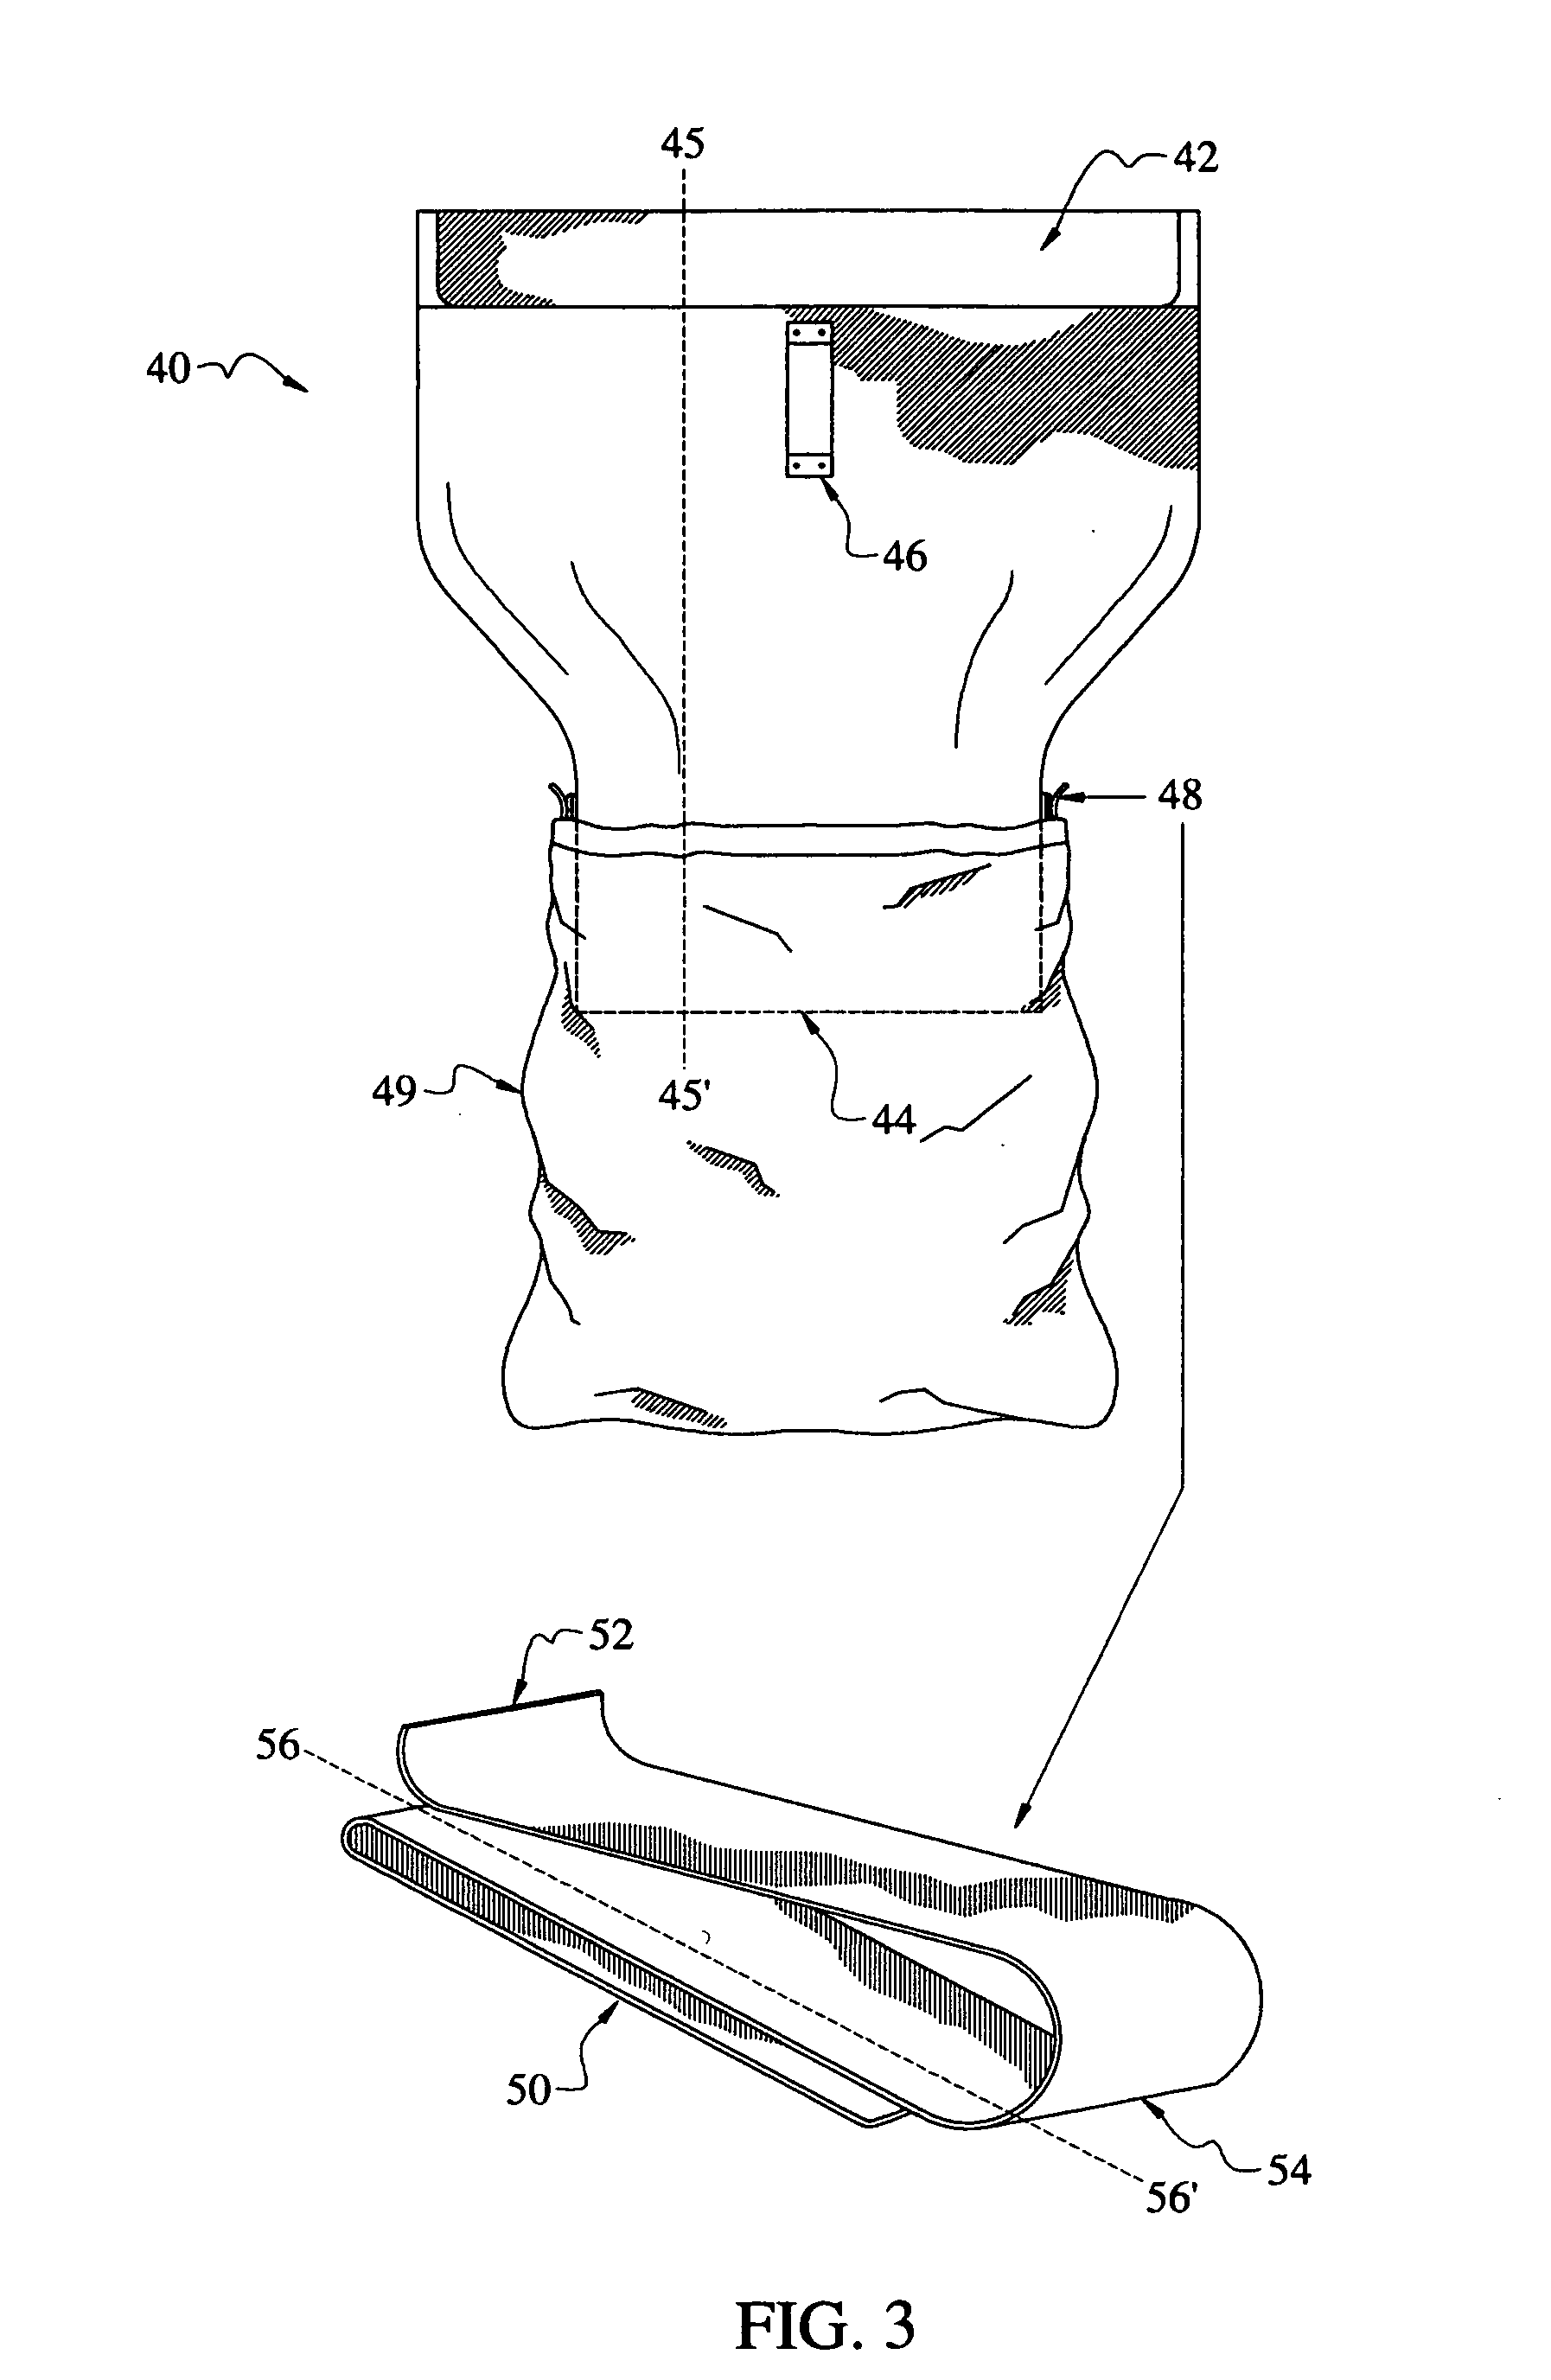 Apparatus and a method for bagging debris in a commercially available trash bag which has closure straps